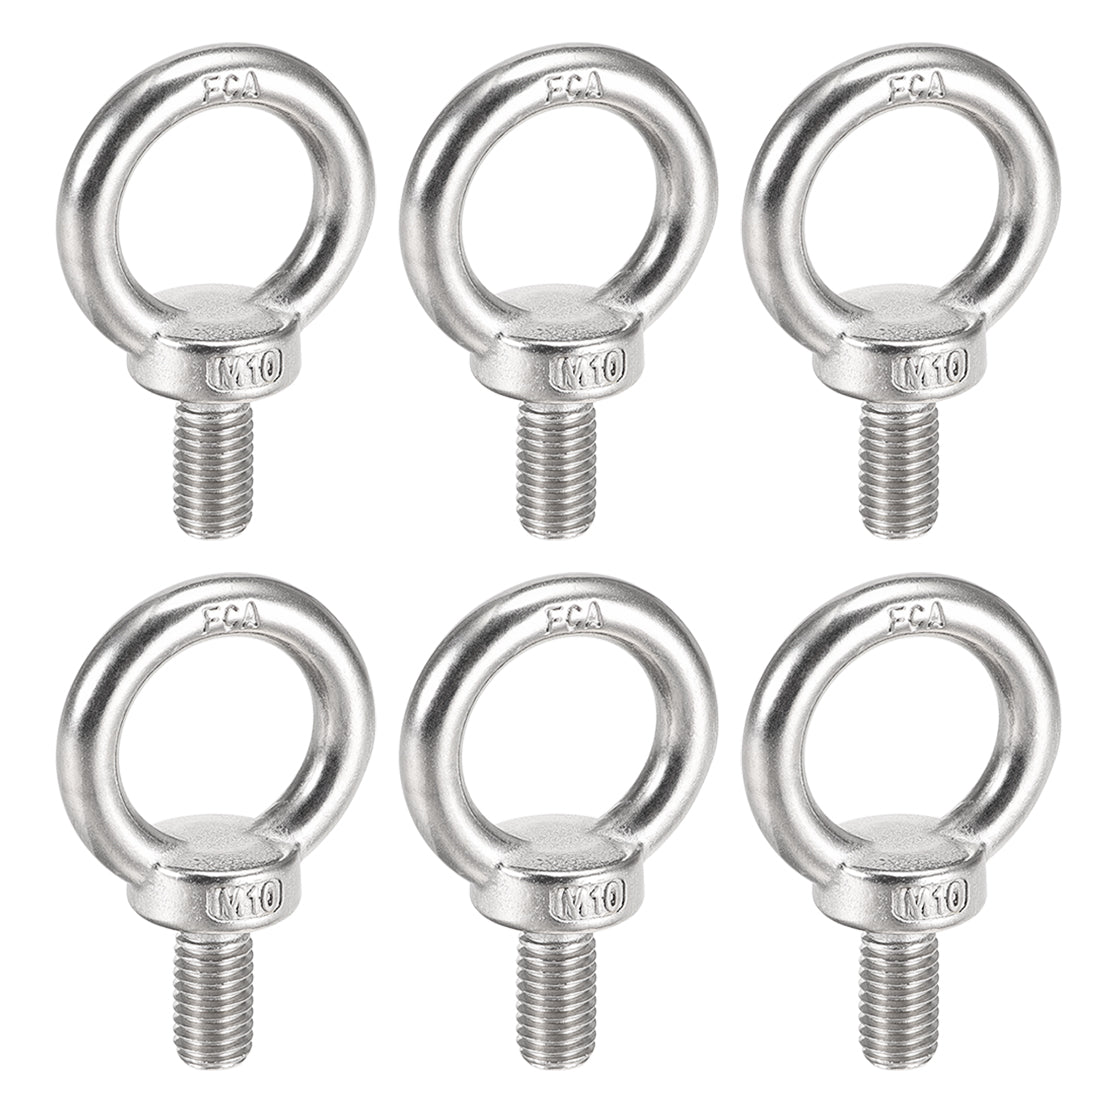 uxcell Uxcell Machinery Shoulder Lifting Forged Eye Bolts M10 x 20mm Thread 6pcs